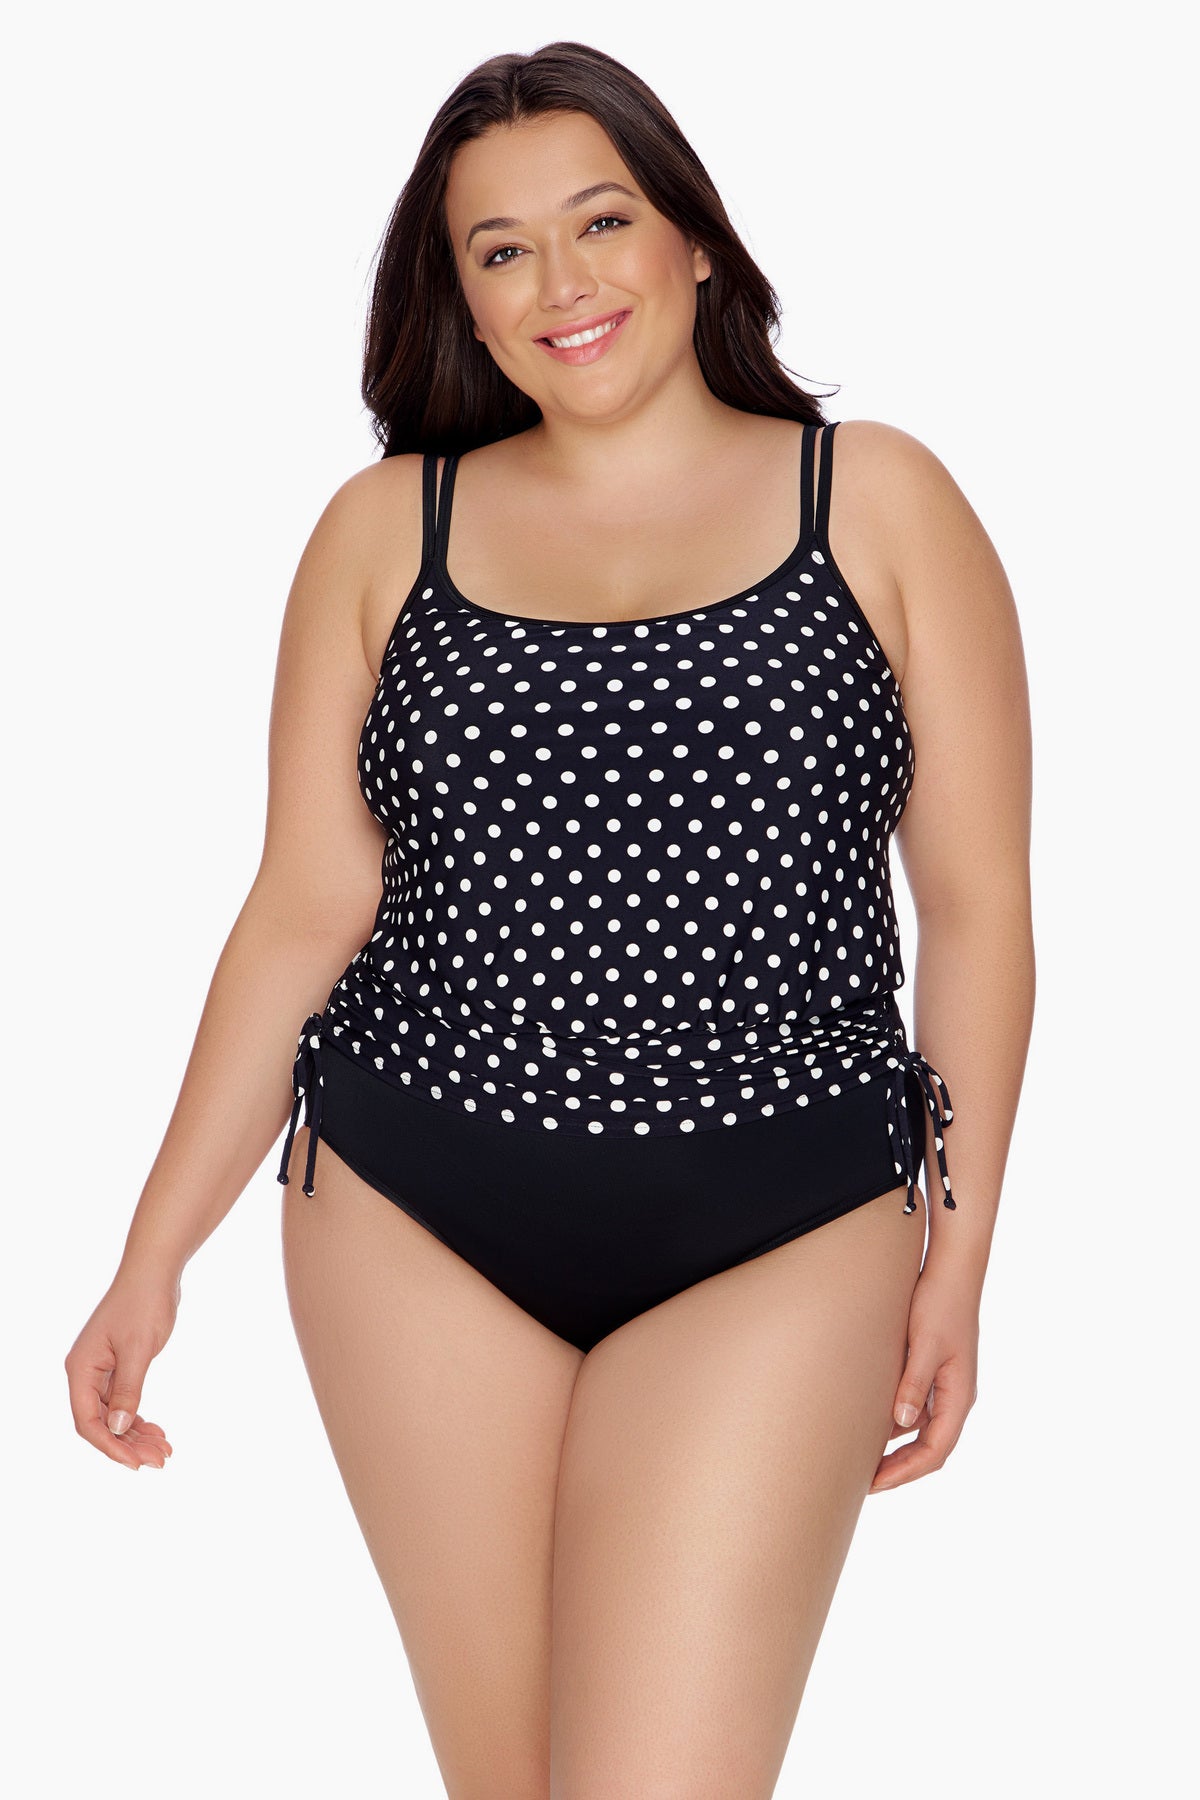 Splash out in style! Post-mastectomy swimwear tips with Jane